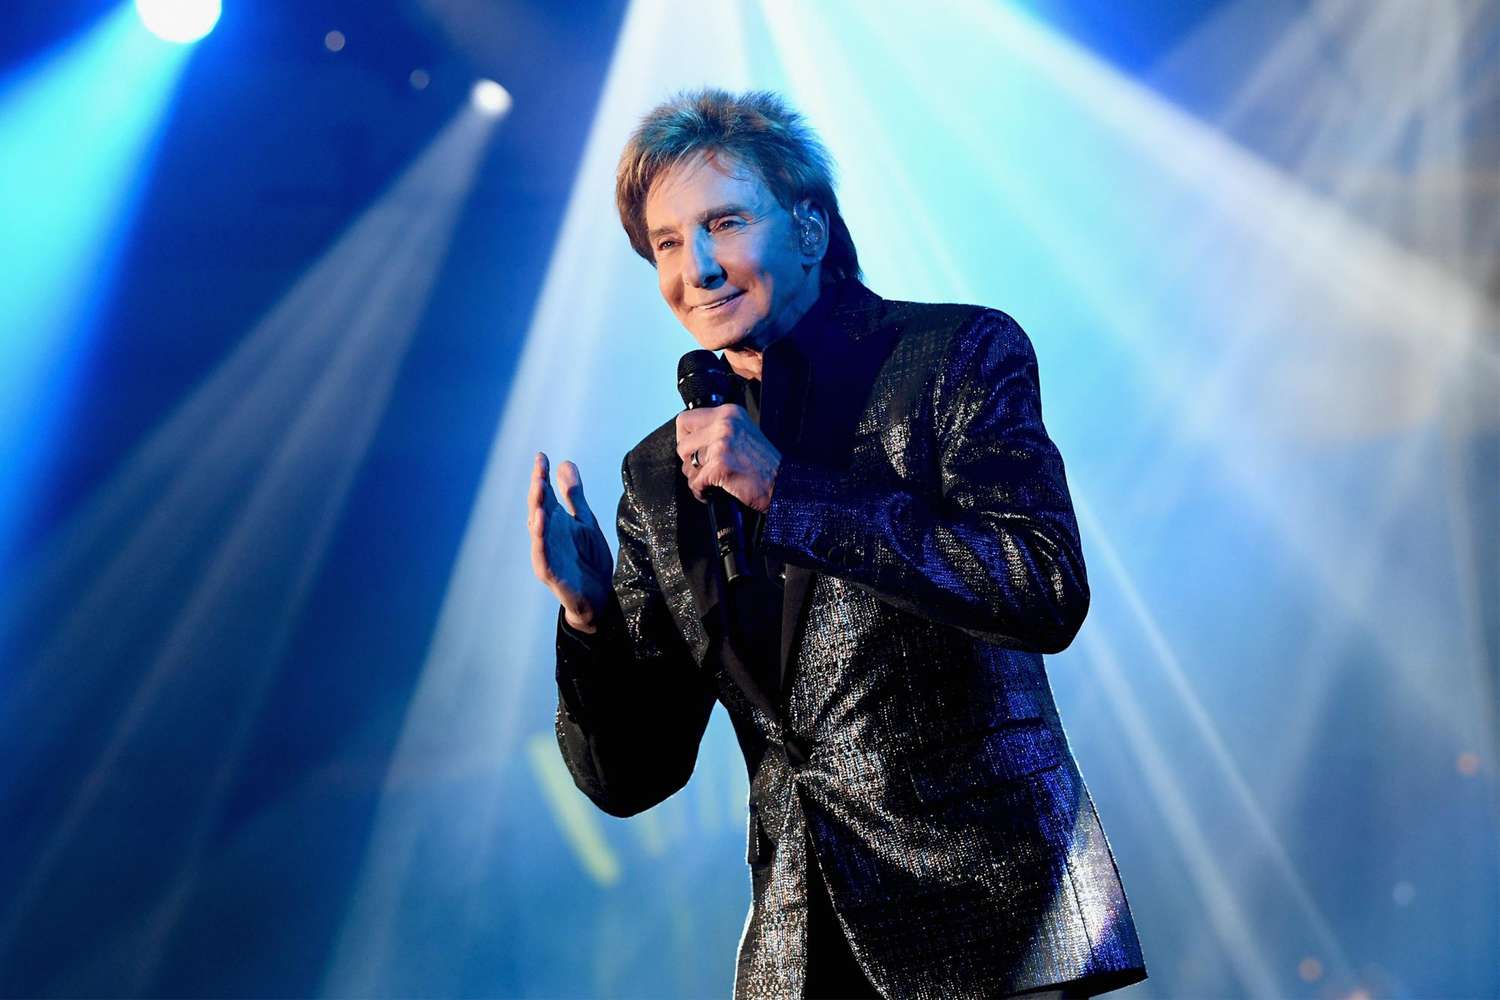 PHOENIX, AZ - MARCH 23: Barry Manilow performs onstage during Celebrity Fight Night XXV on March 23, 2019 in Phoenix, Arizona. (Photo by Emma McIntyre/Getty Images for Celebrity Fight Night)